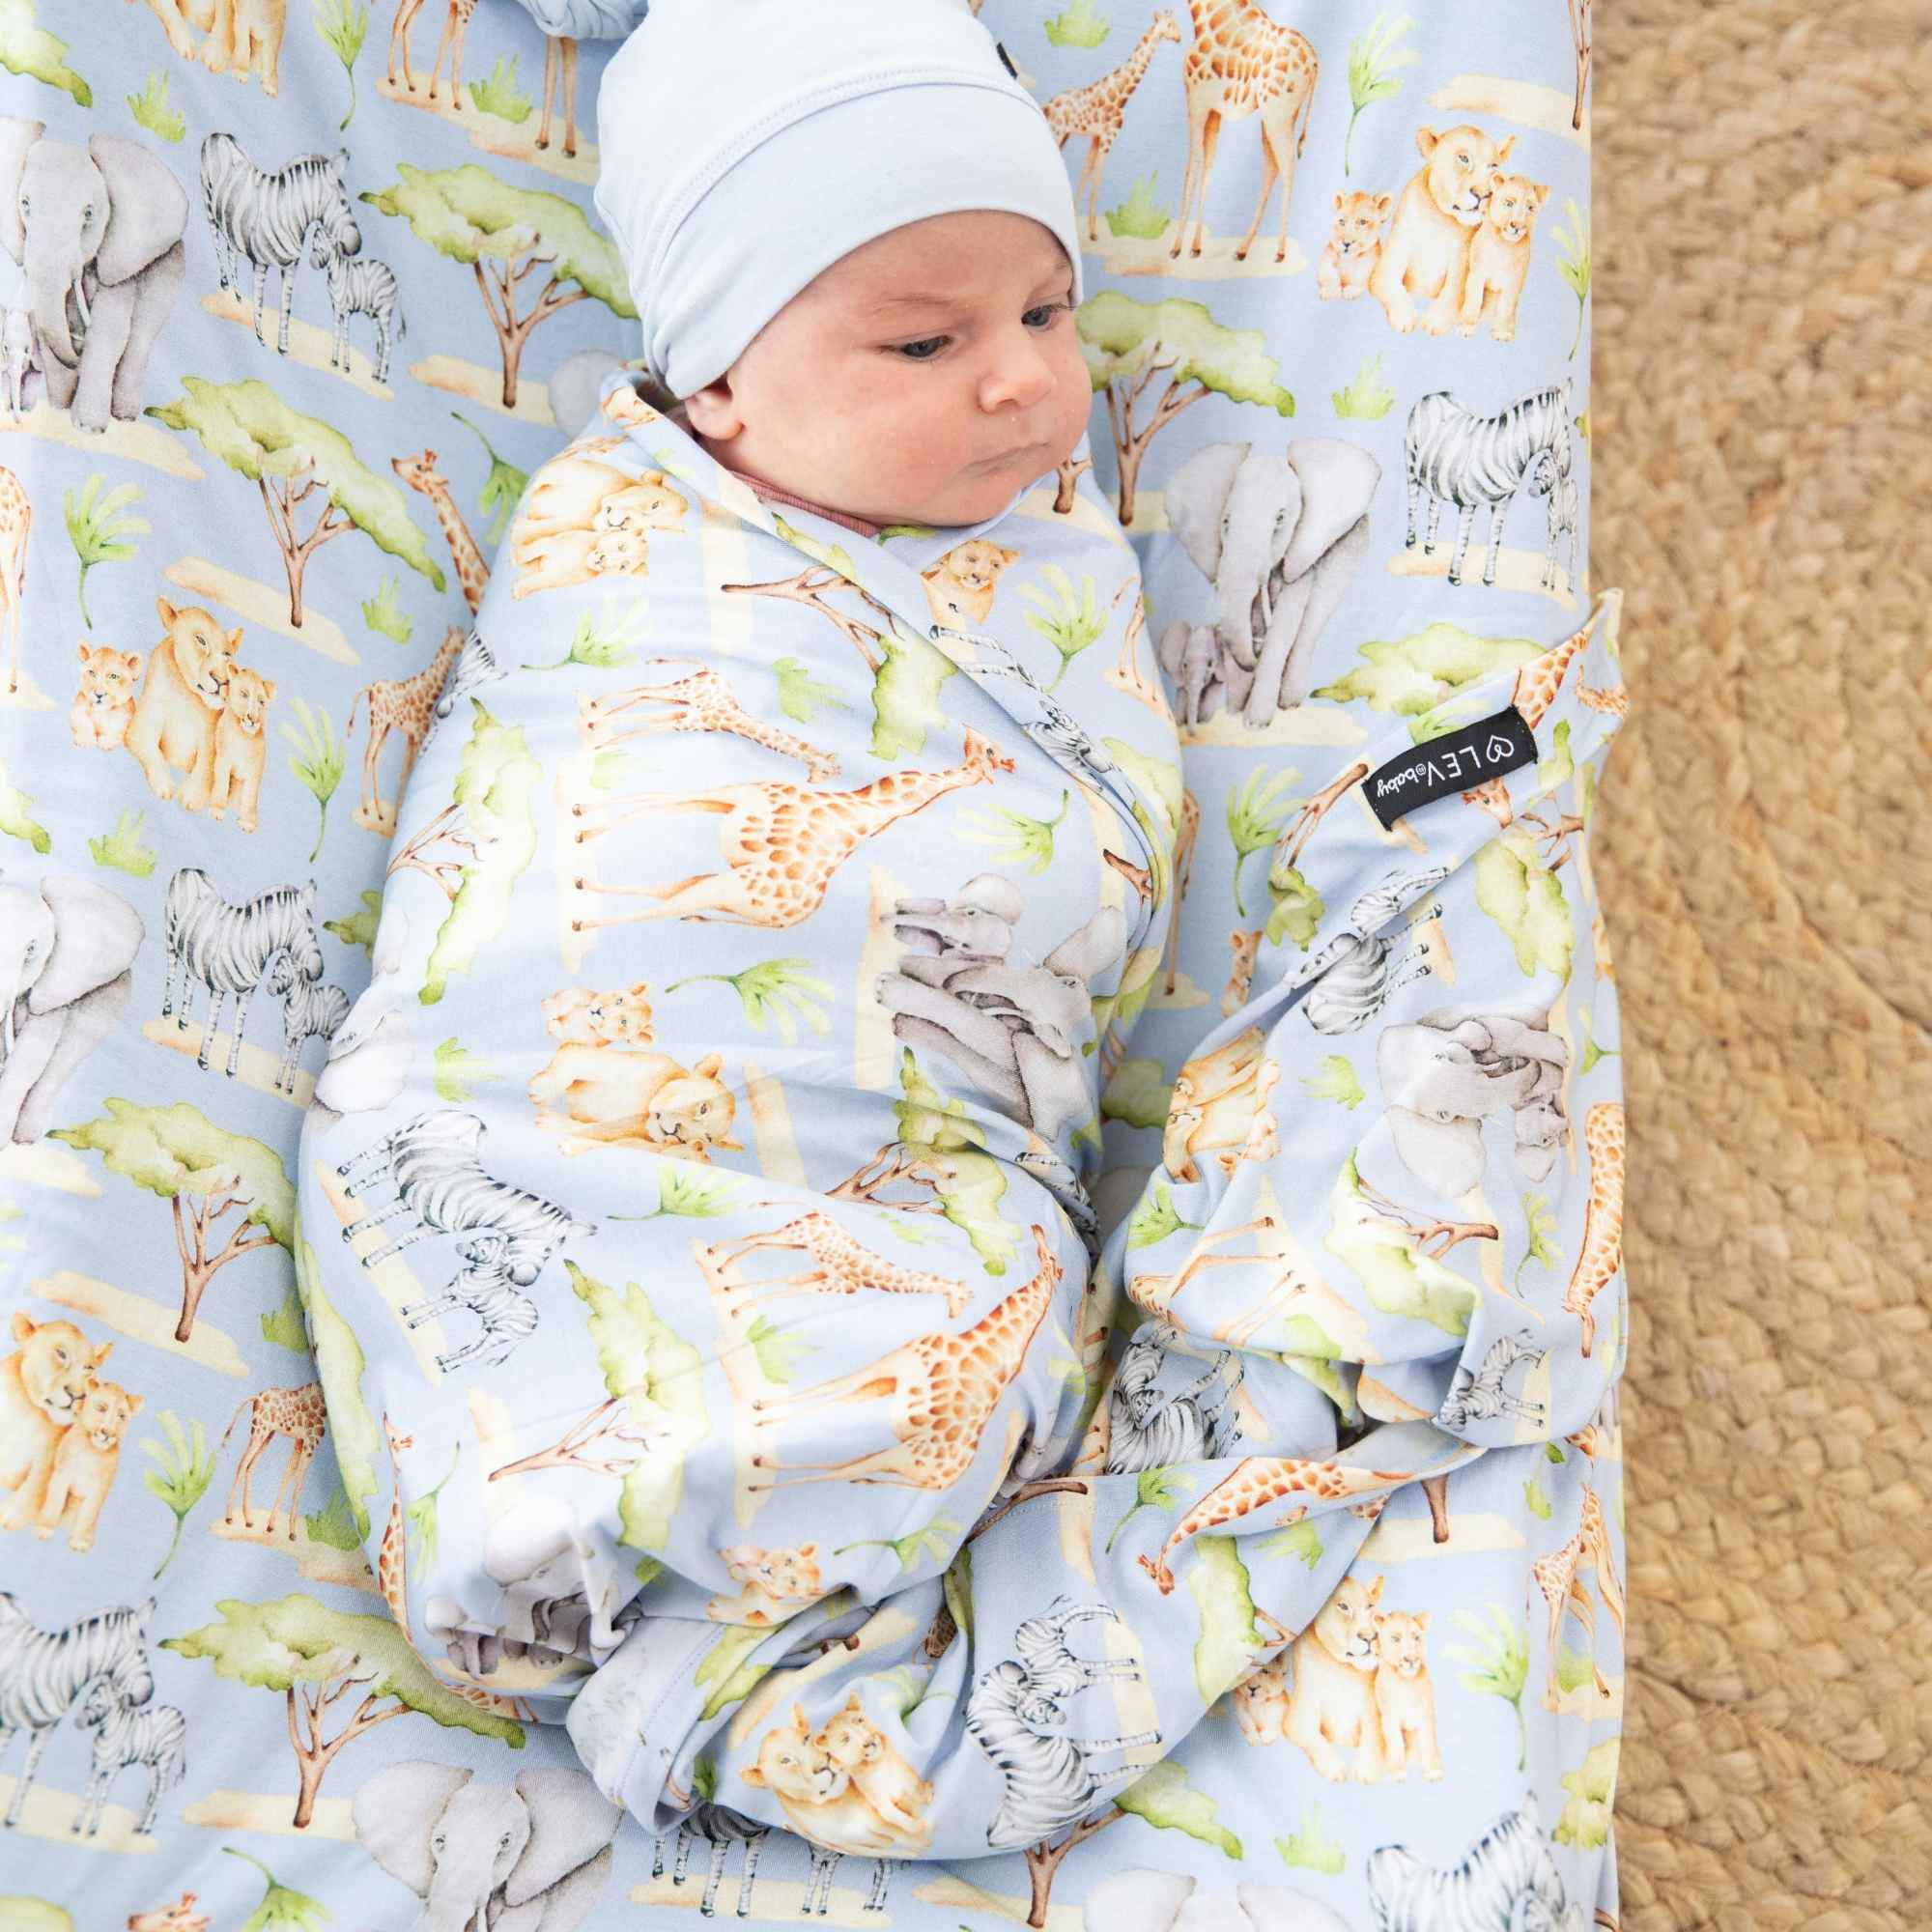 Rory Changing Pad Cover: FINAL SALE